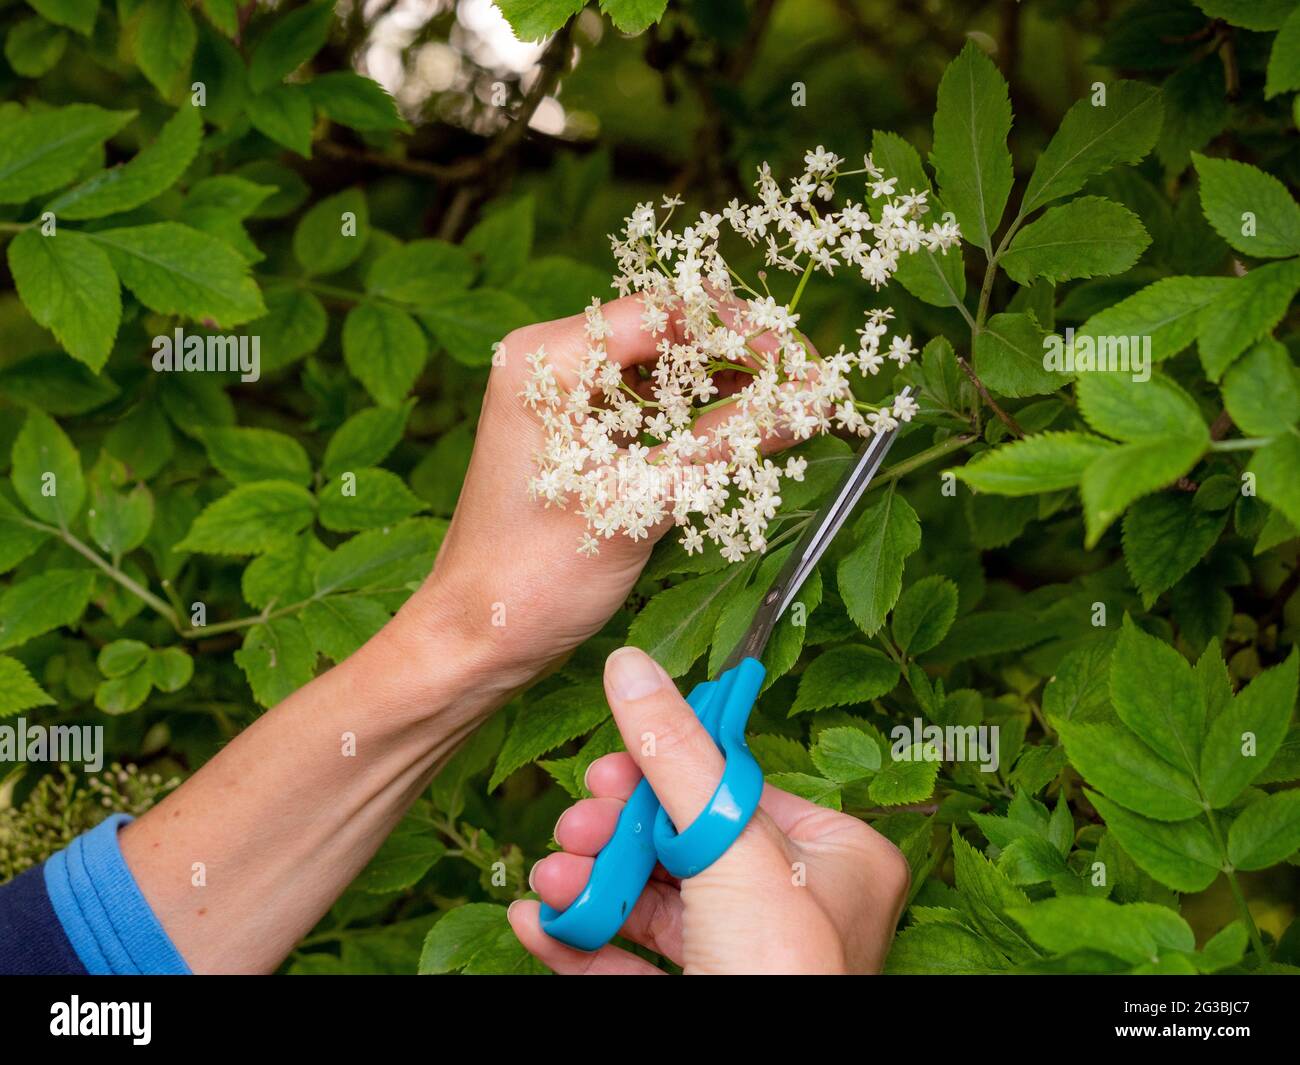 Caucasian female foraging for elderflowers. Closeup of hands with scissors cutting flower heads Stock Photo